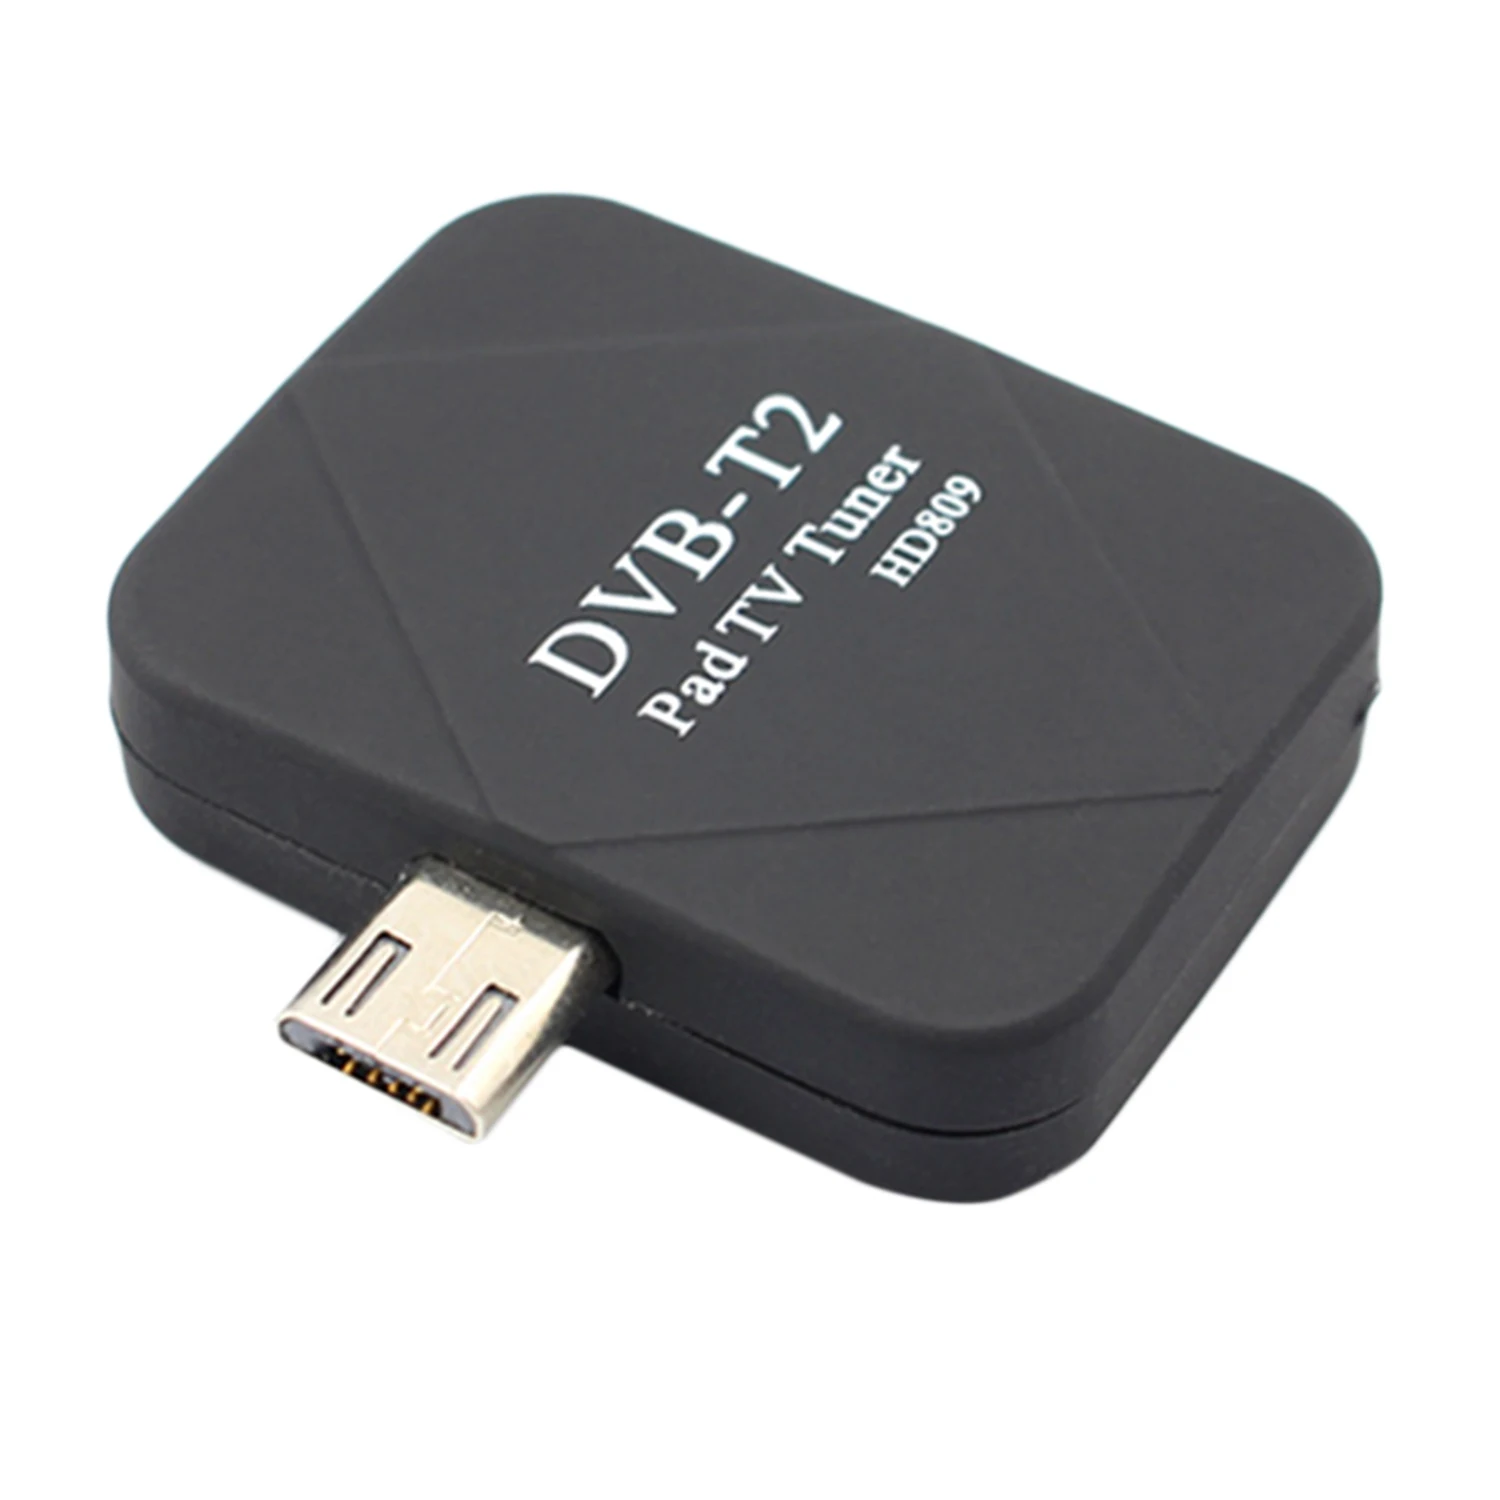 DVB-T2 Empfänger Micro USB Tuner TV Receiver Stick For Android OS 4.1 Tablet 